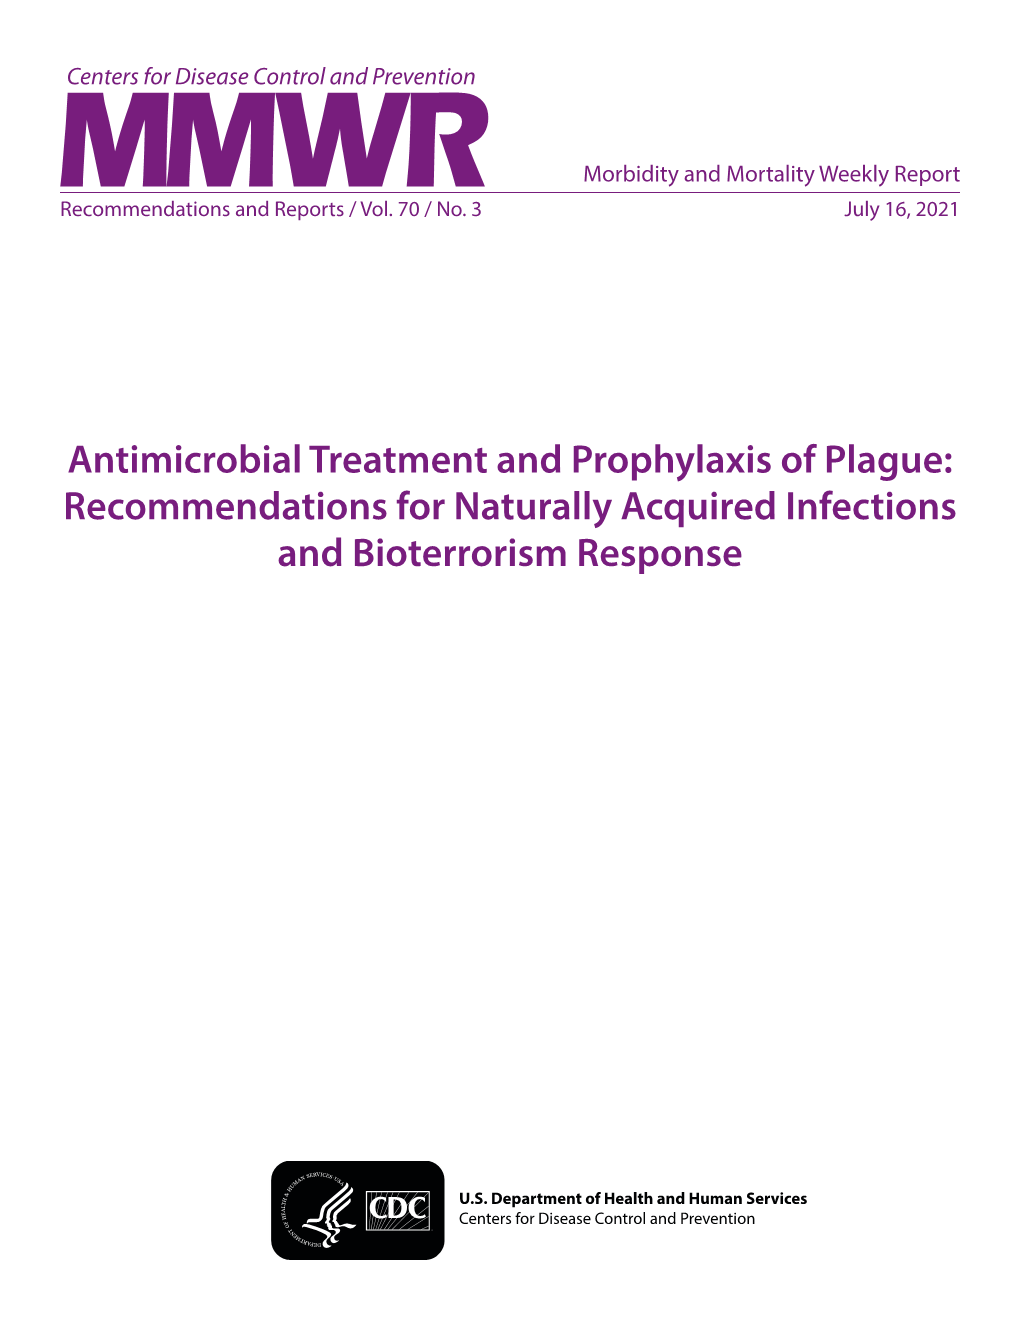 Antimicrobial Treatment and Prophylaxis of Plague: Recommendations for Naturally Acquired Infections and Bioterrorism Response